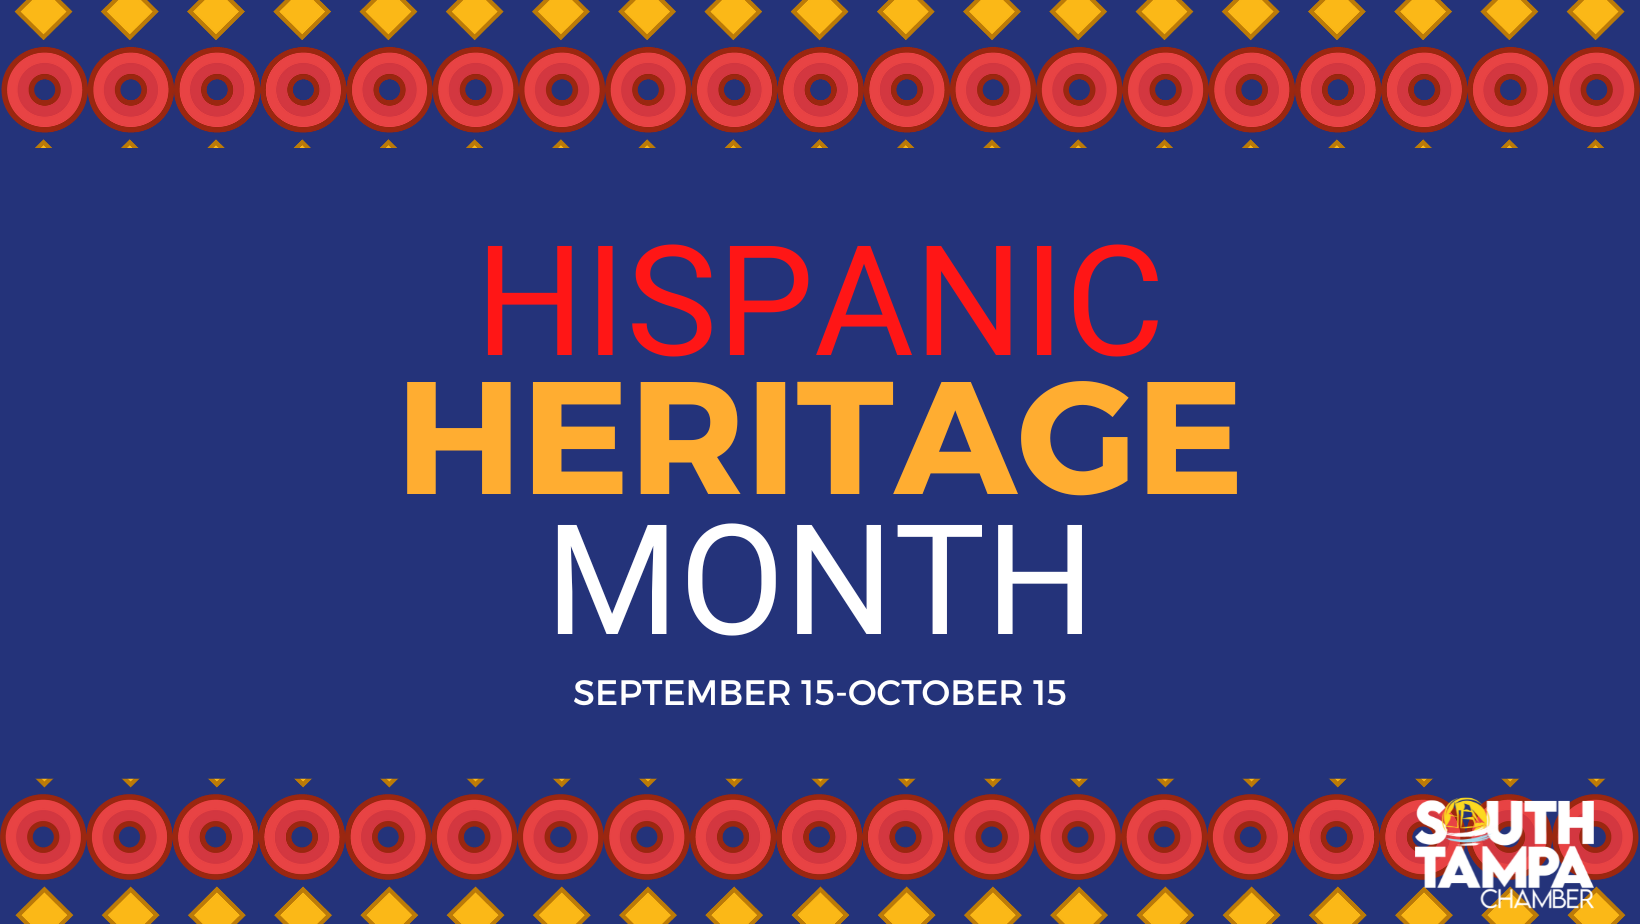 Featured Members for National Hispanic Heritage Month